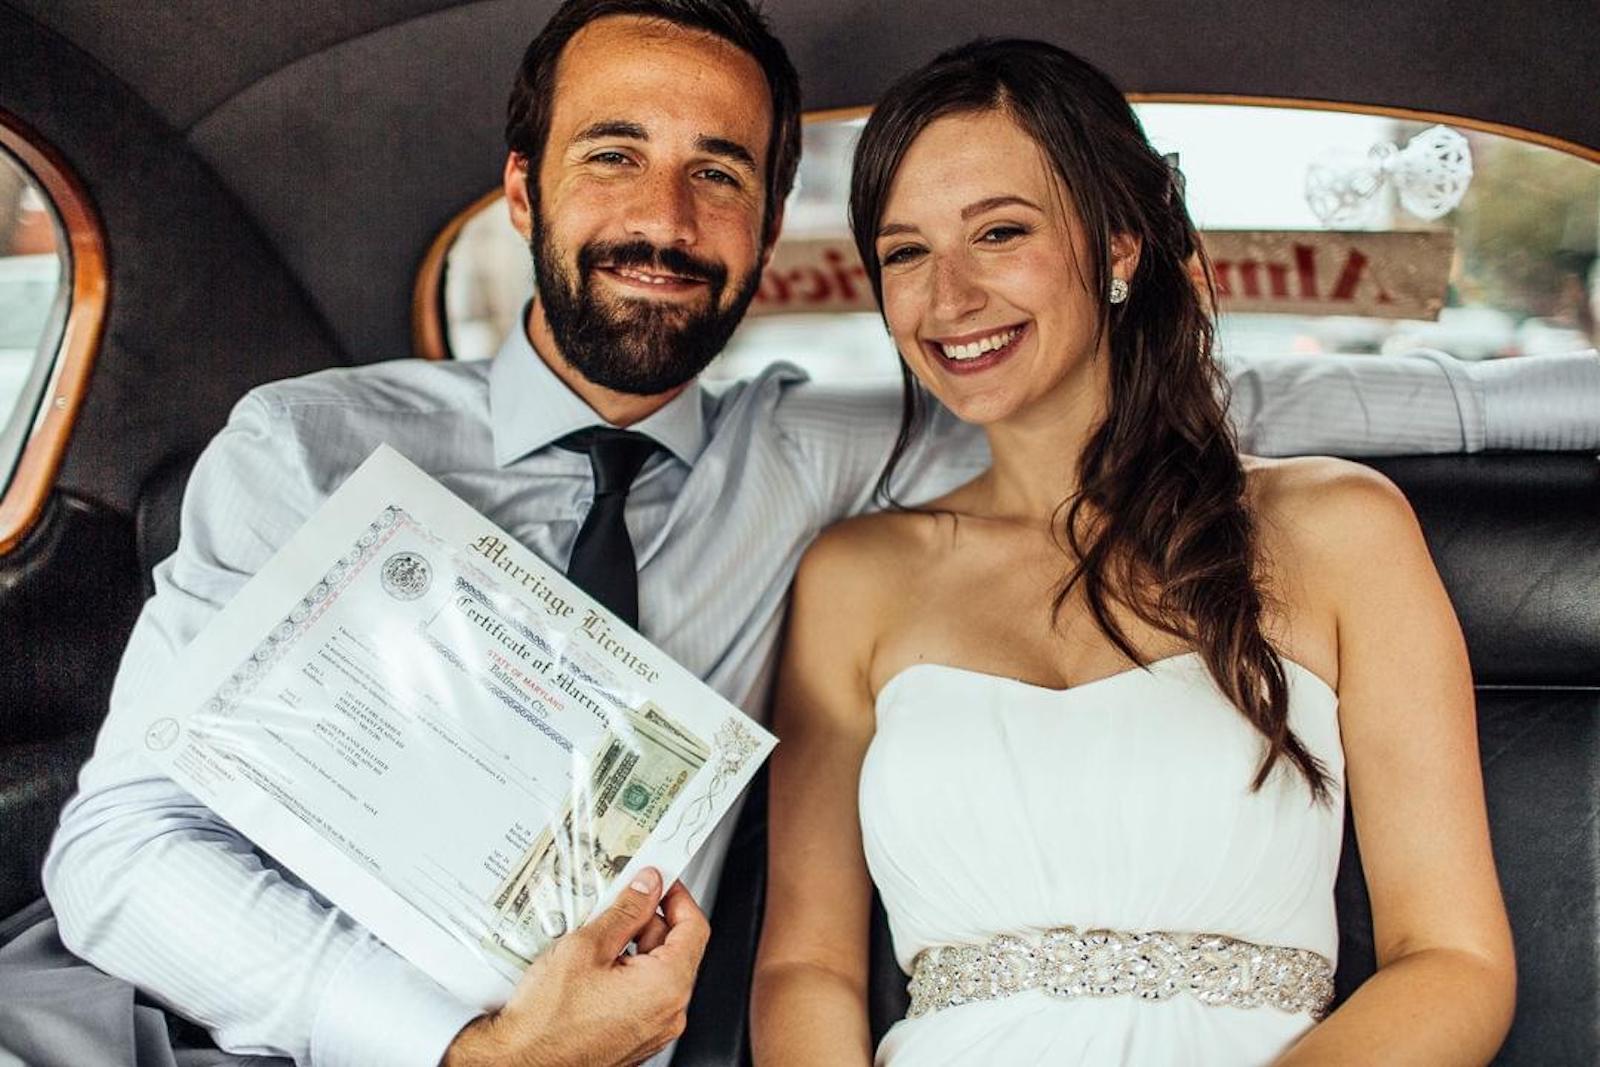 bride and groom sitting in the backseat of car posing with marriage license